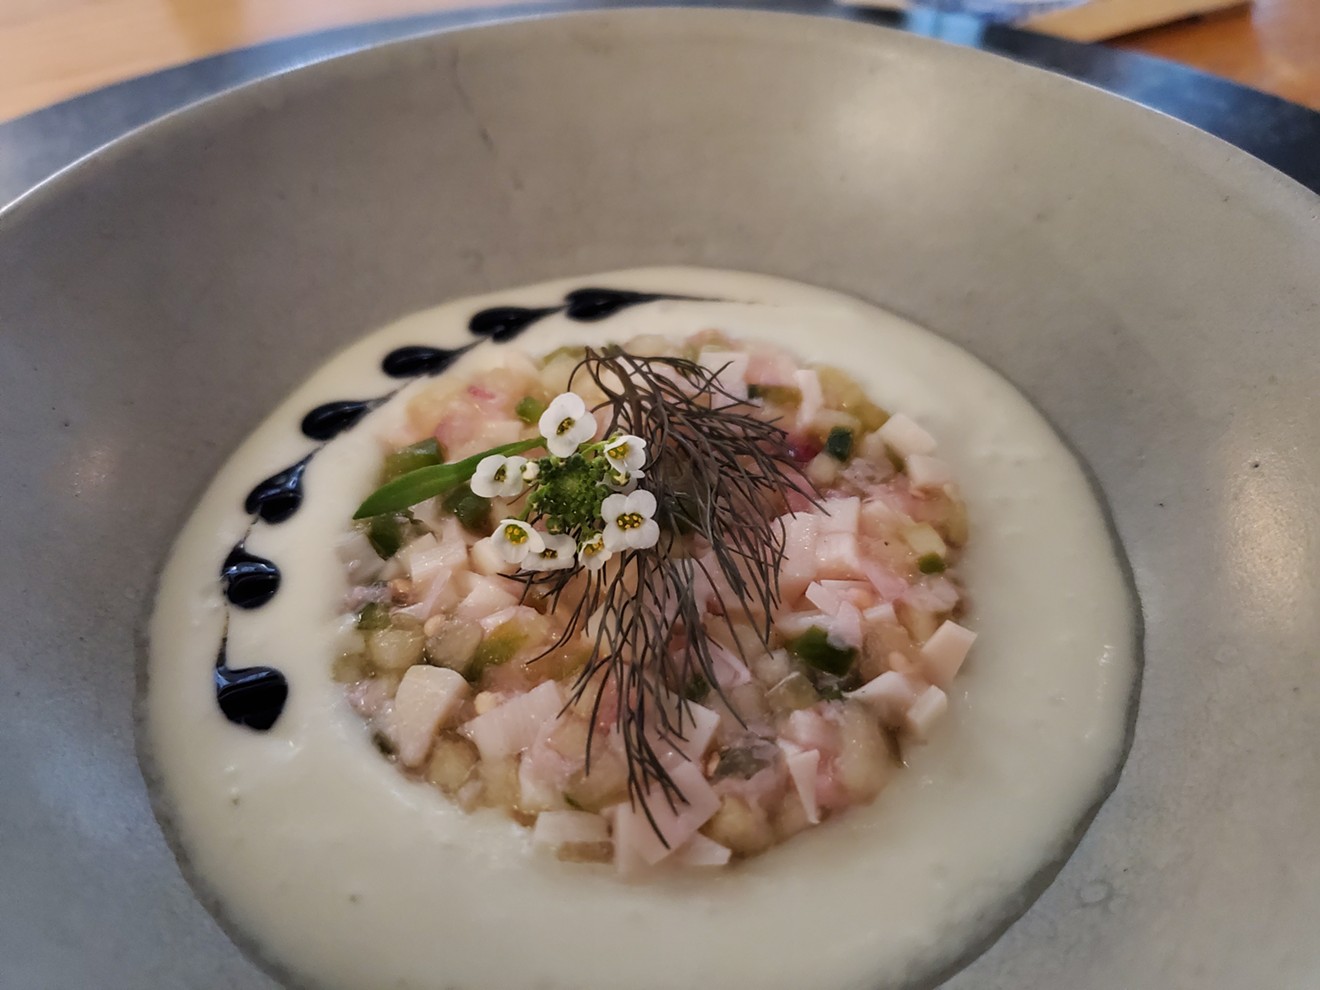 Ceviche made of hearts of palm at Bruto, which certainly deserves Michelin consideration.